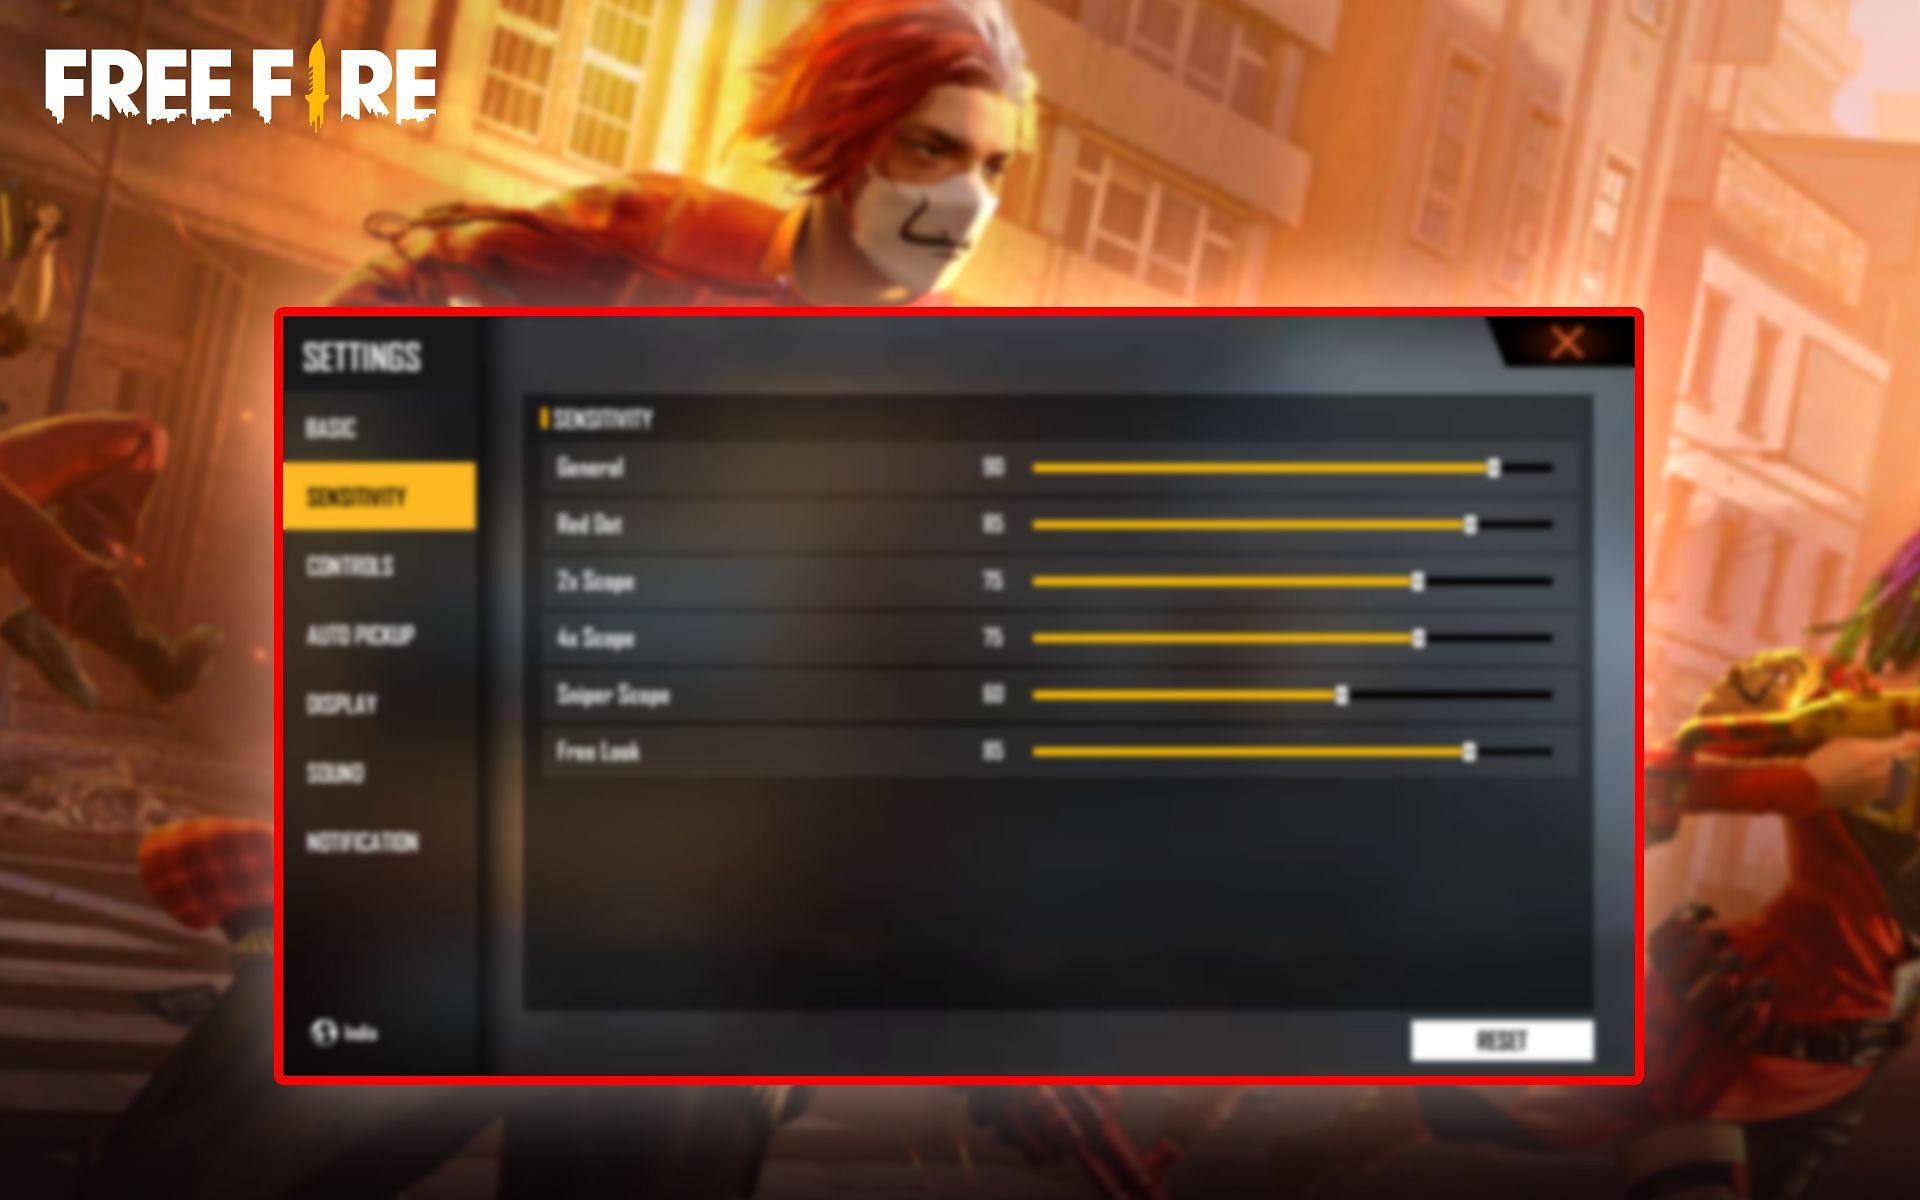 Sensitivity settings are recommended to be on the higher ends, helping players flick (Image via Sportskeeda)